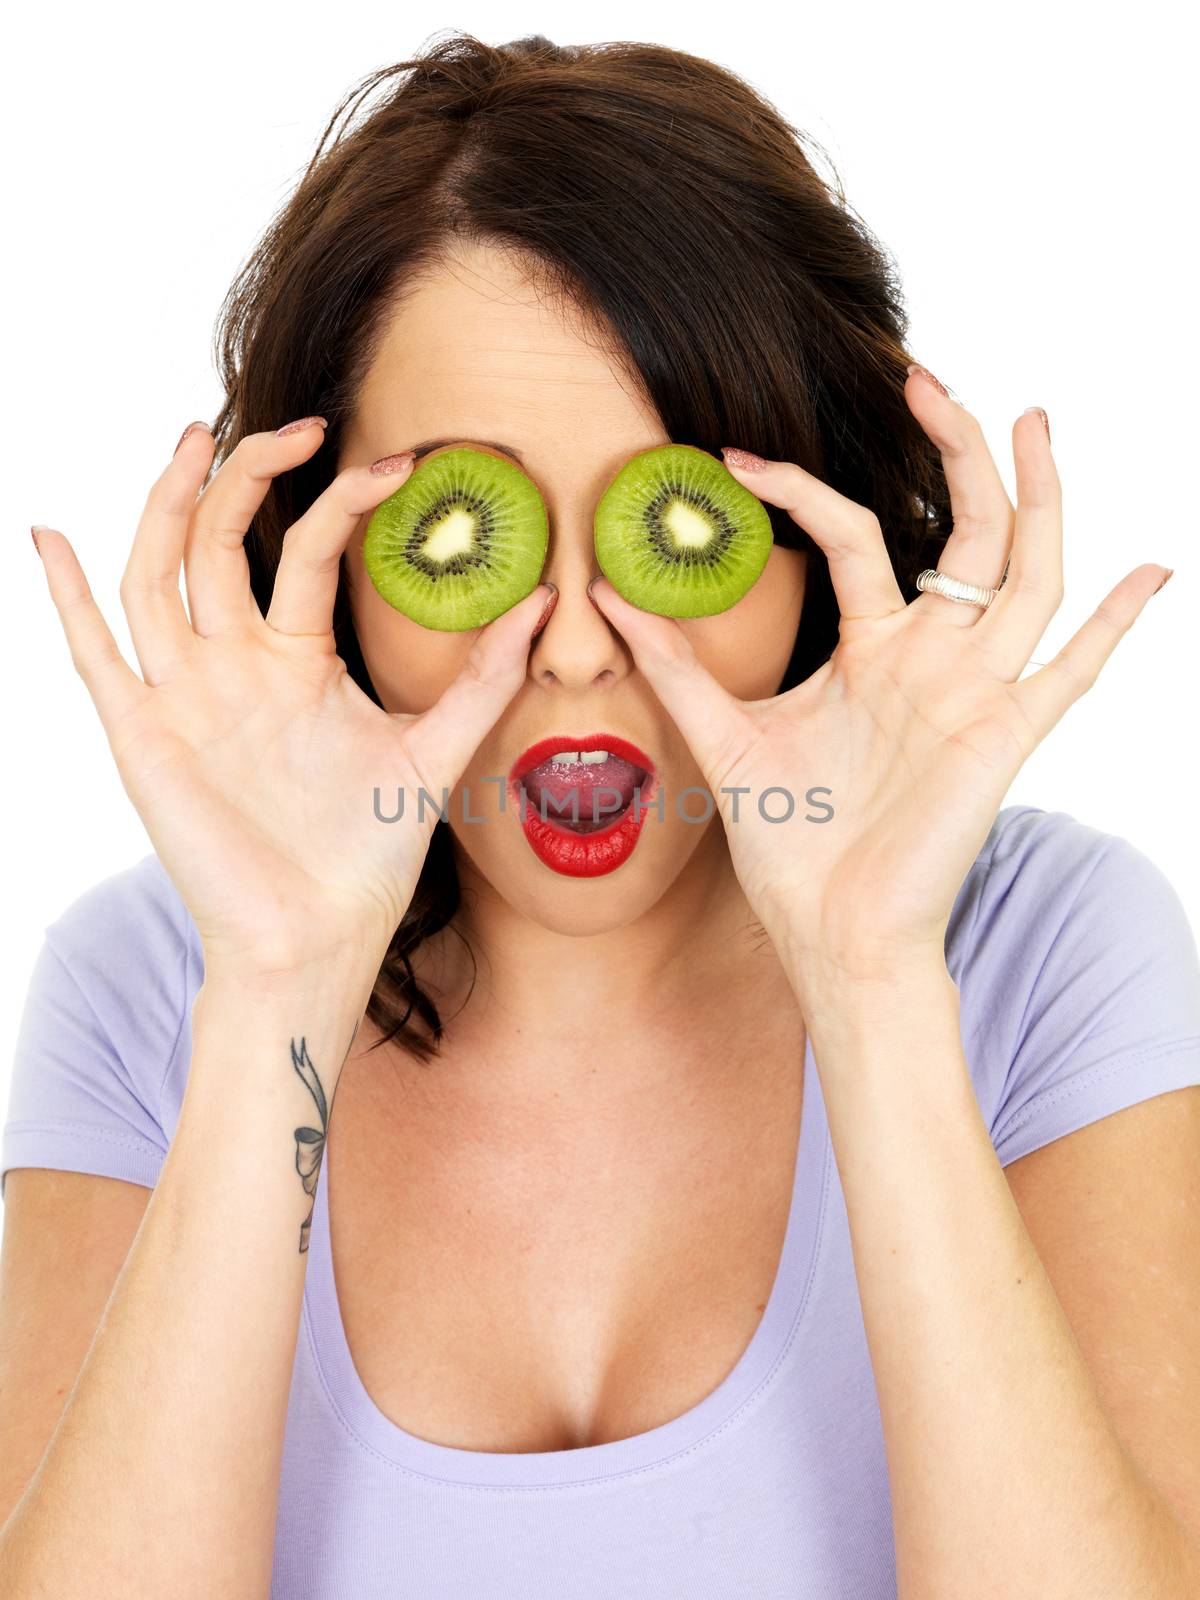 Shocked Surprised Young Woman Covering Eyes with Kiwi Fruit